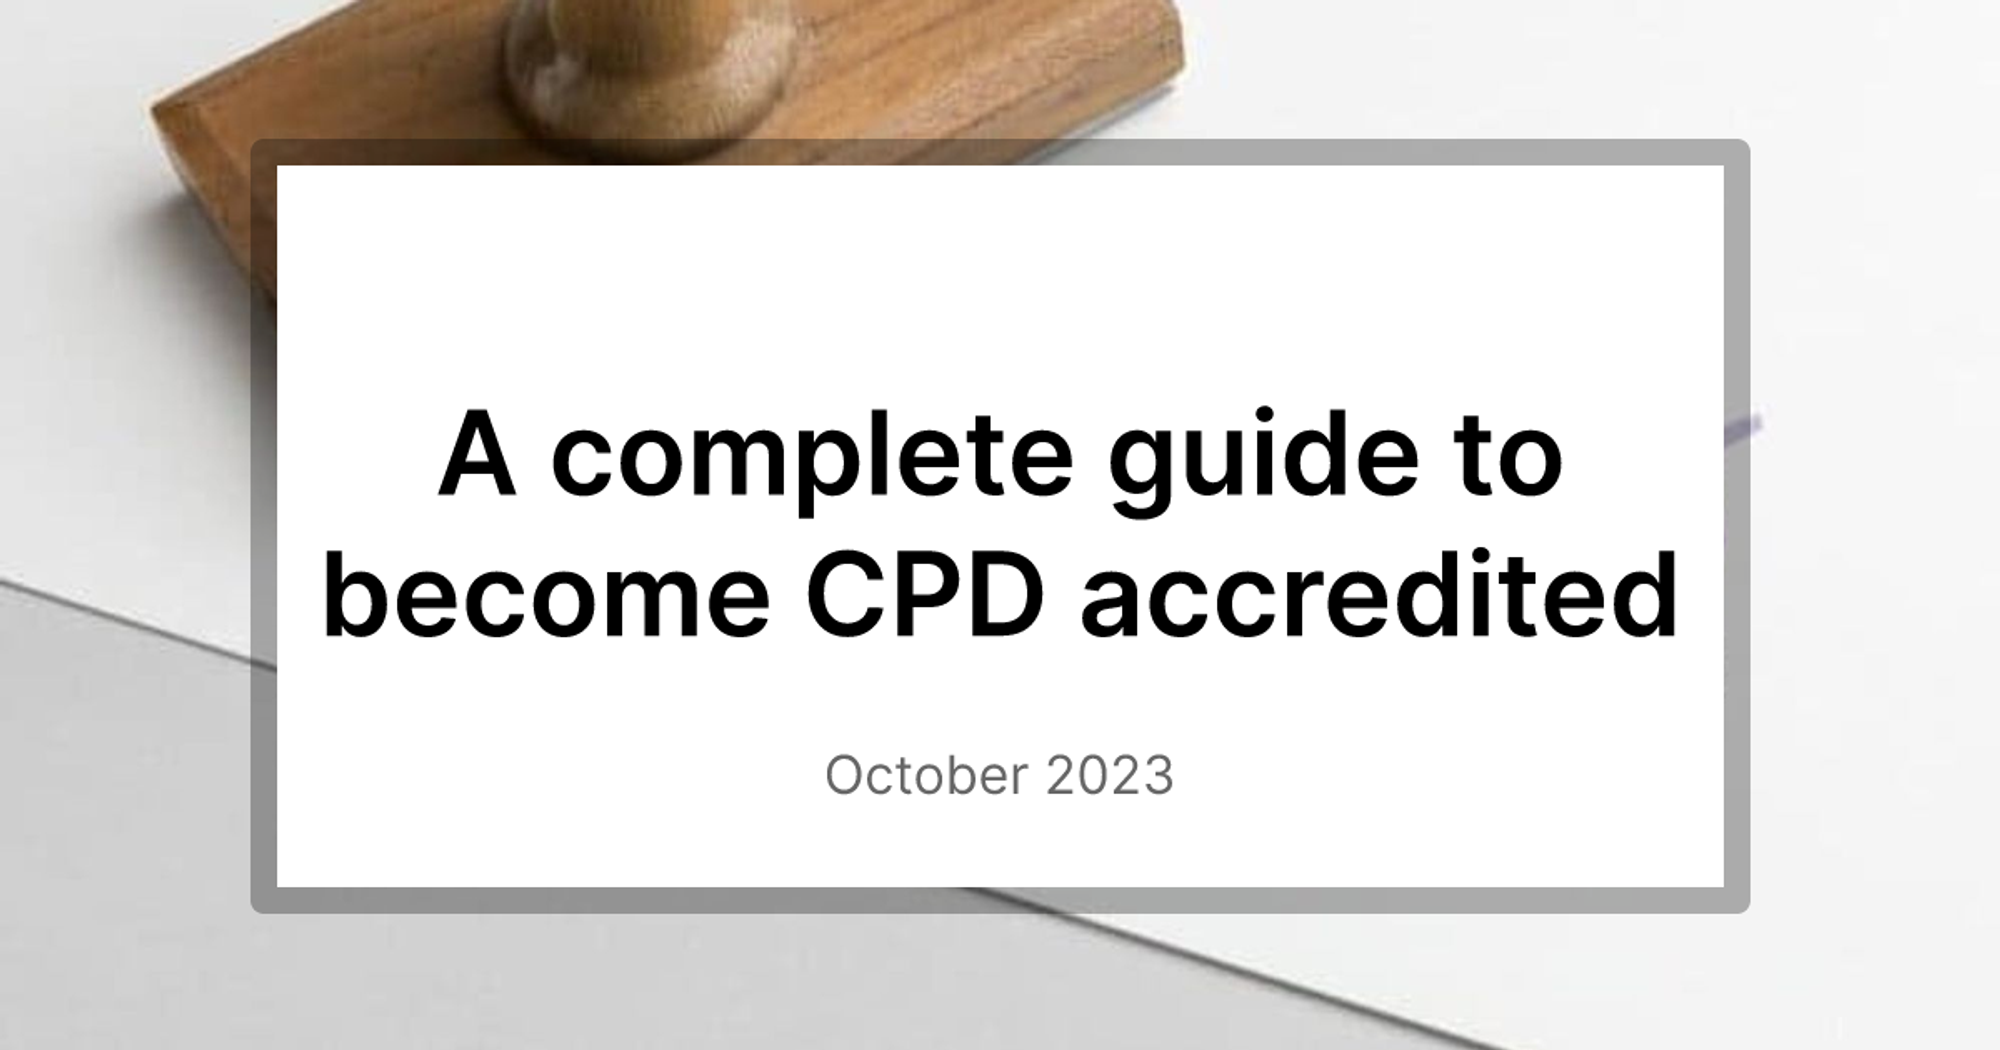 A complete guide to become CPD accredited